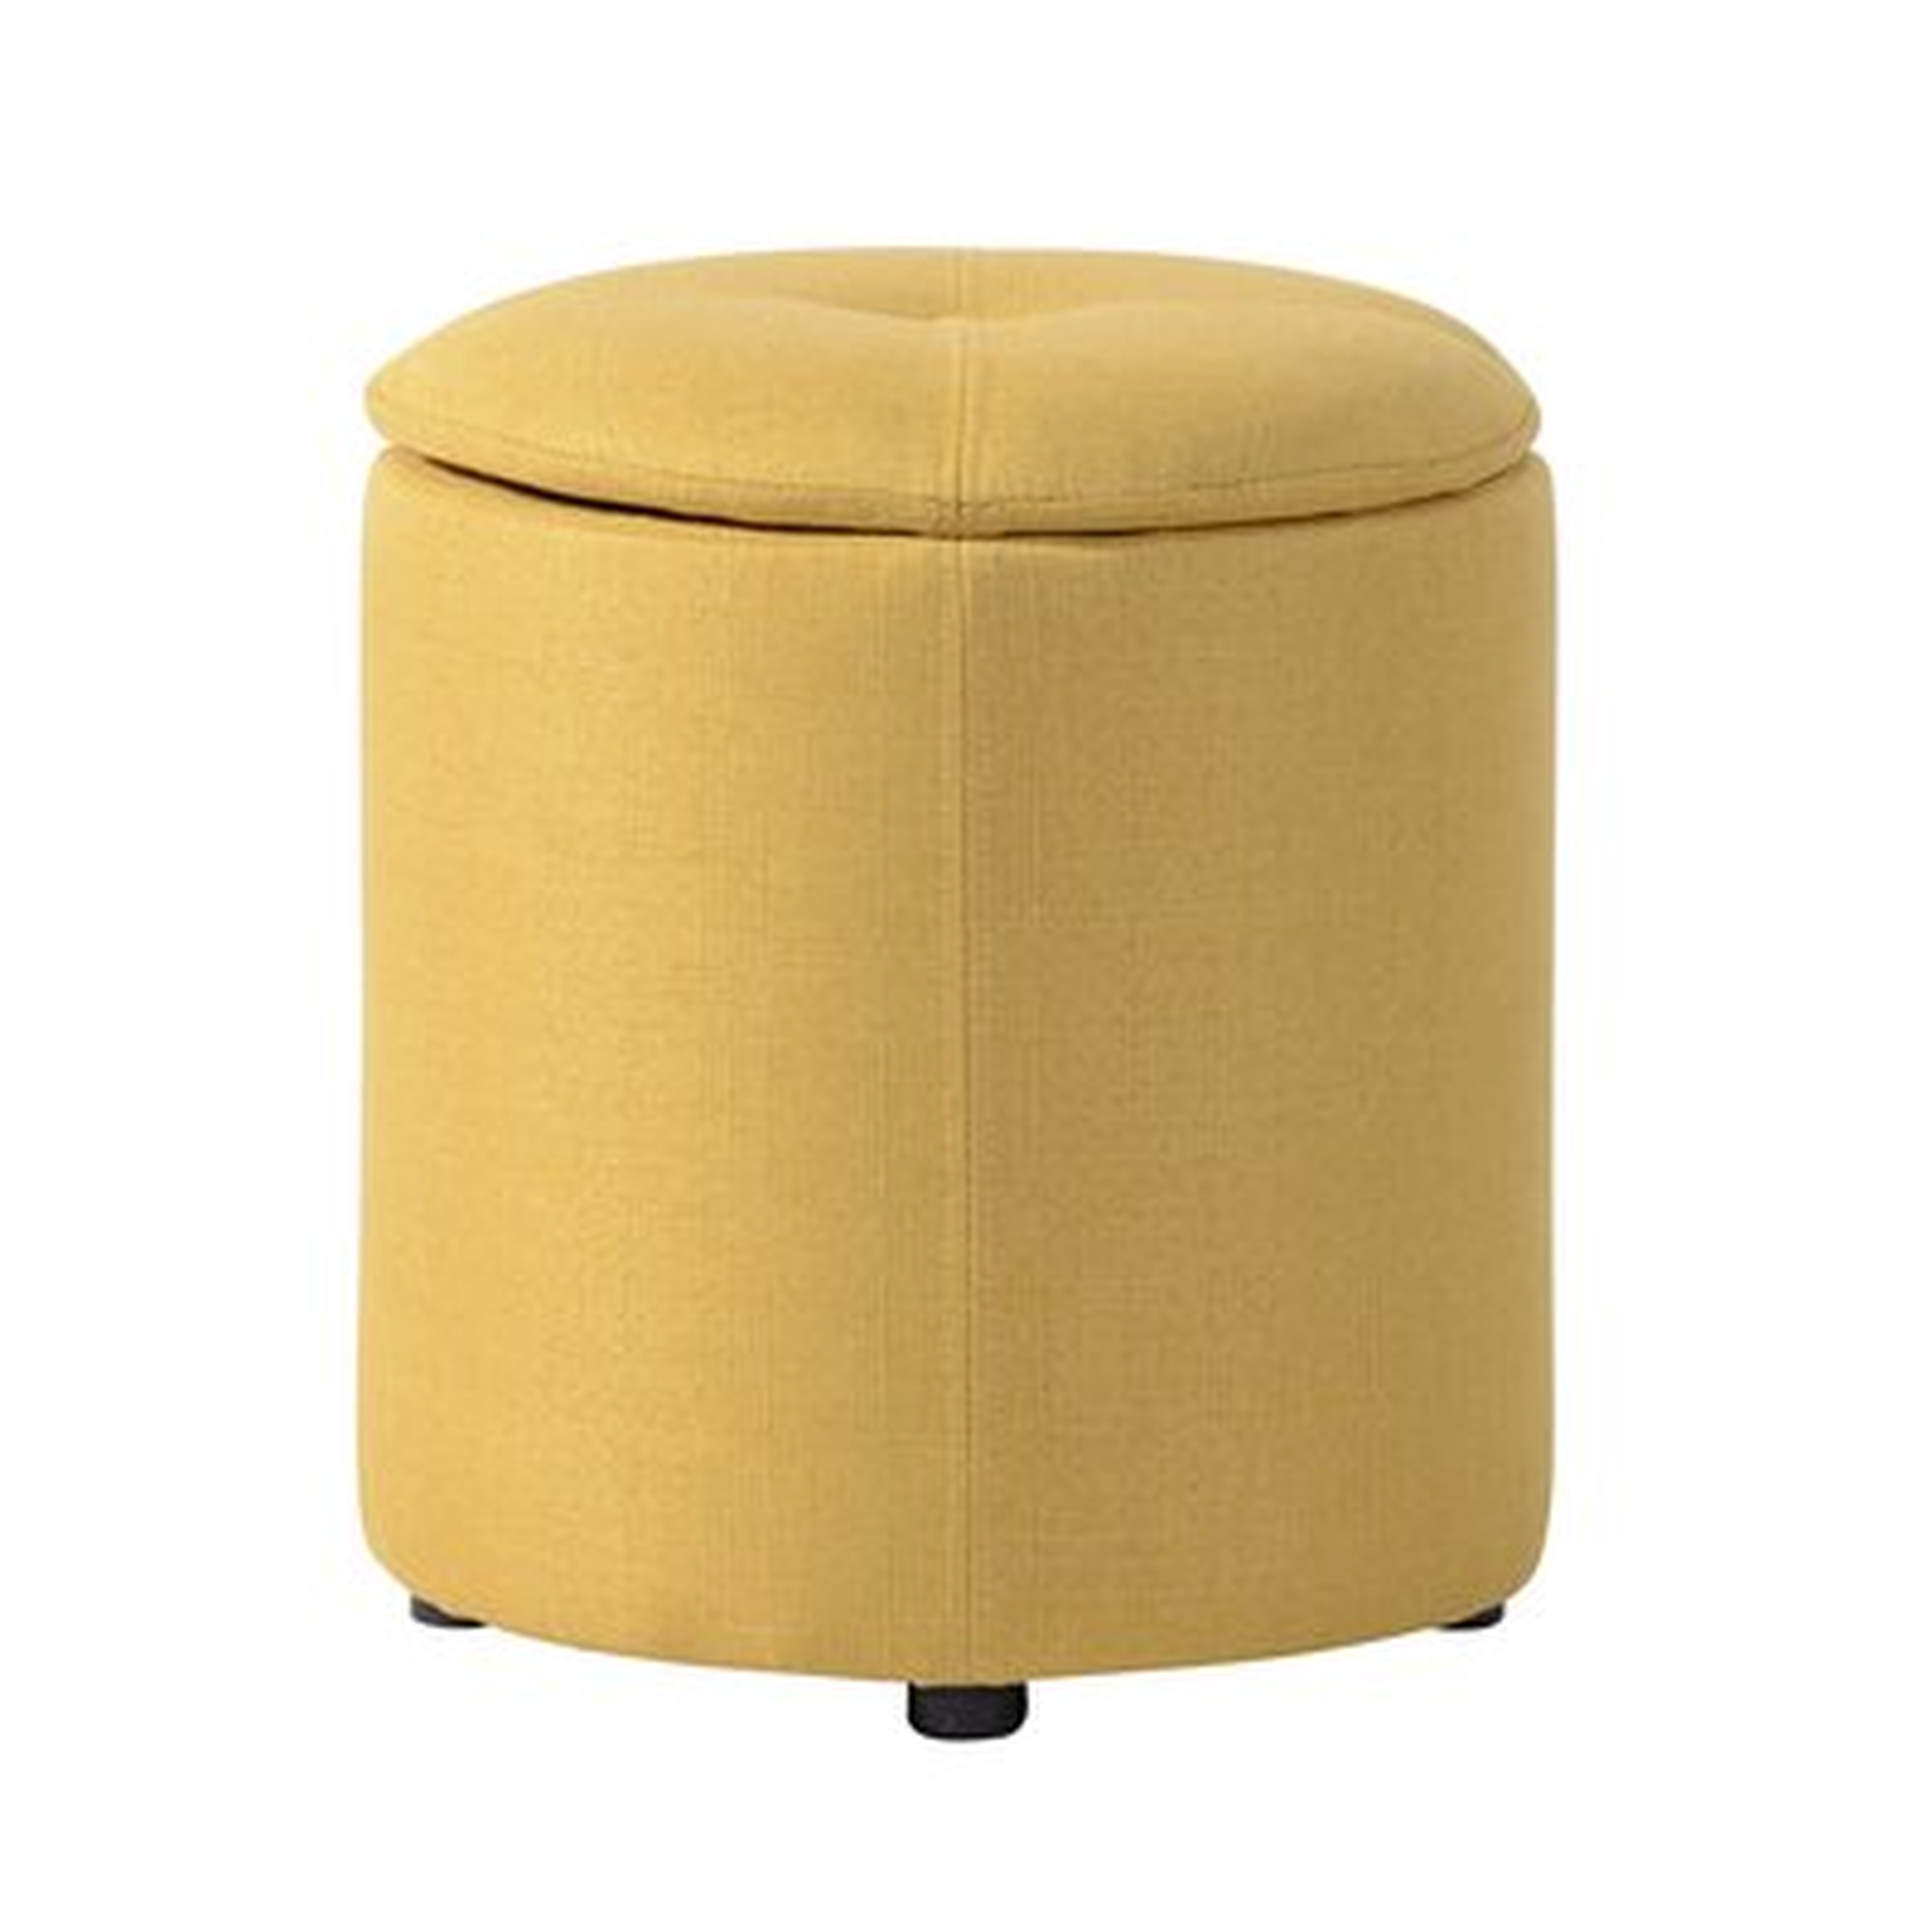 Chacko 14" 100% Polyester Round Solid Color Storage Ottoman - Wayfair